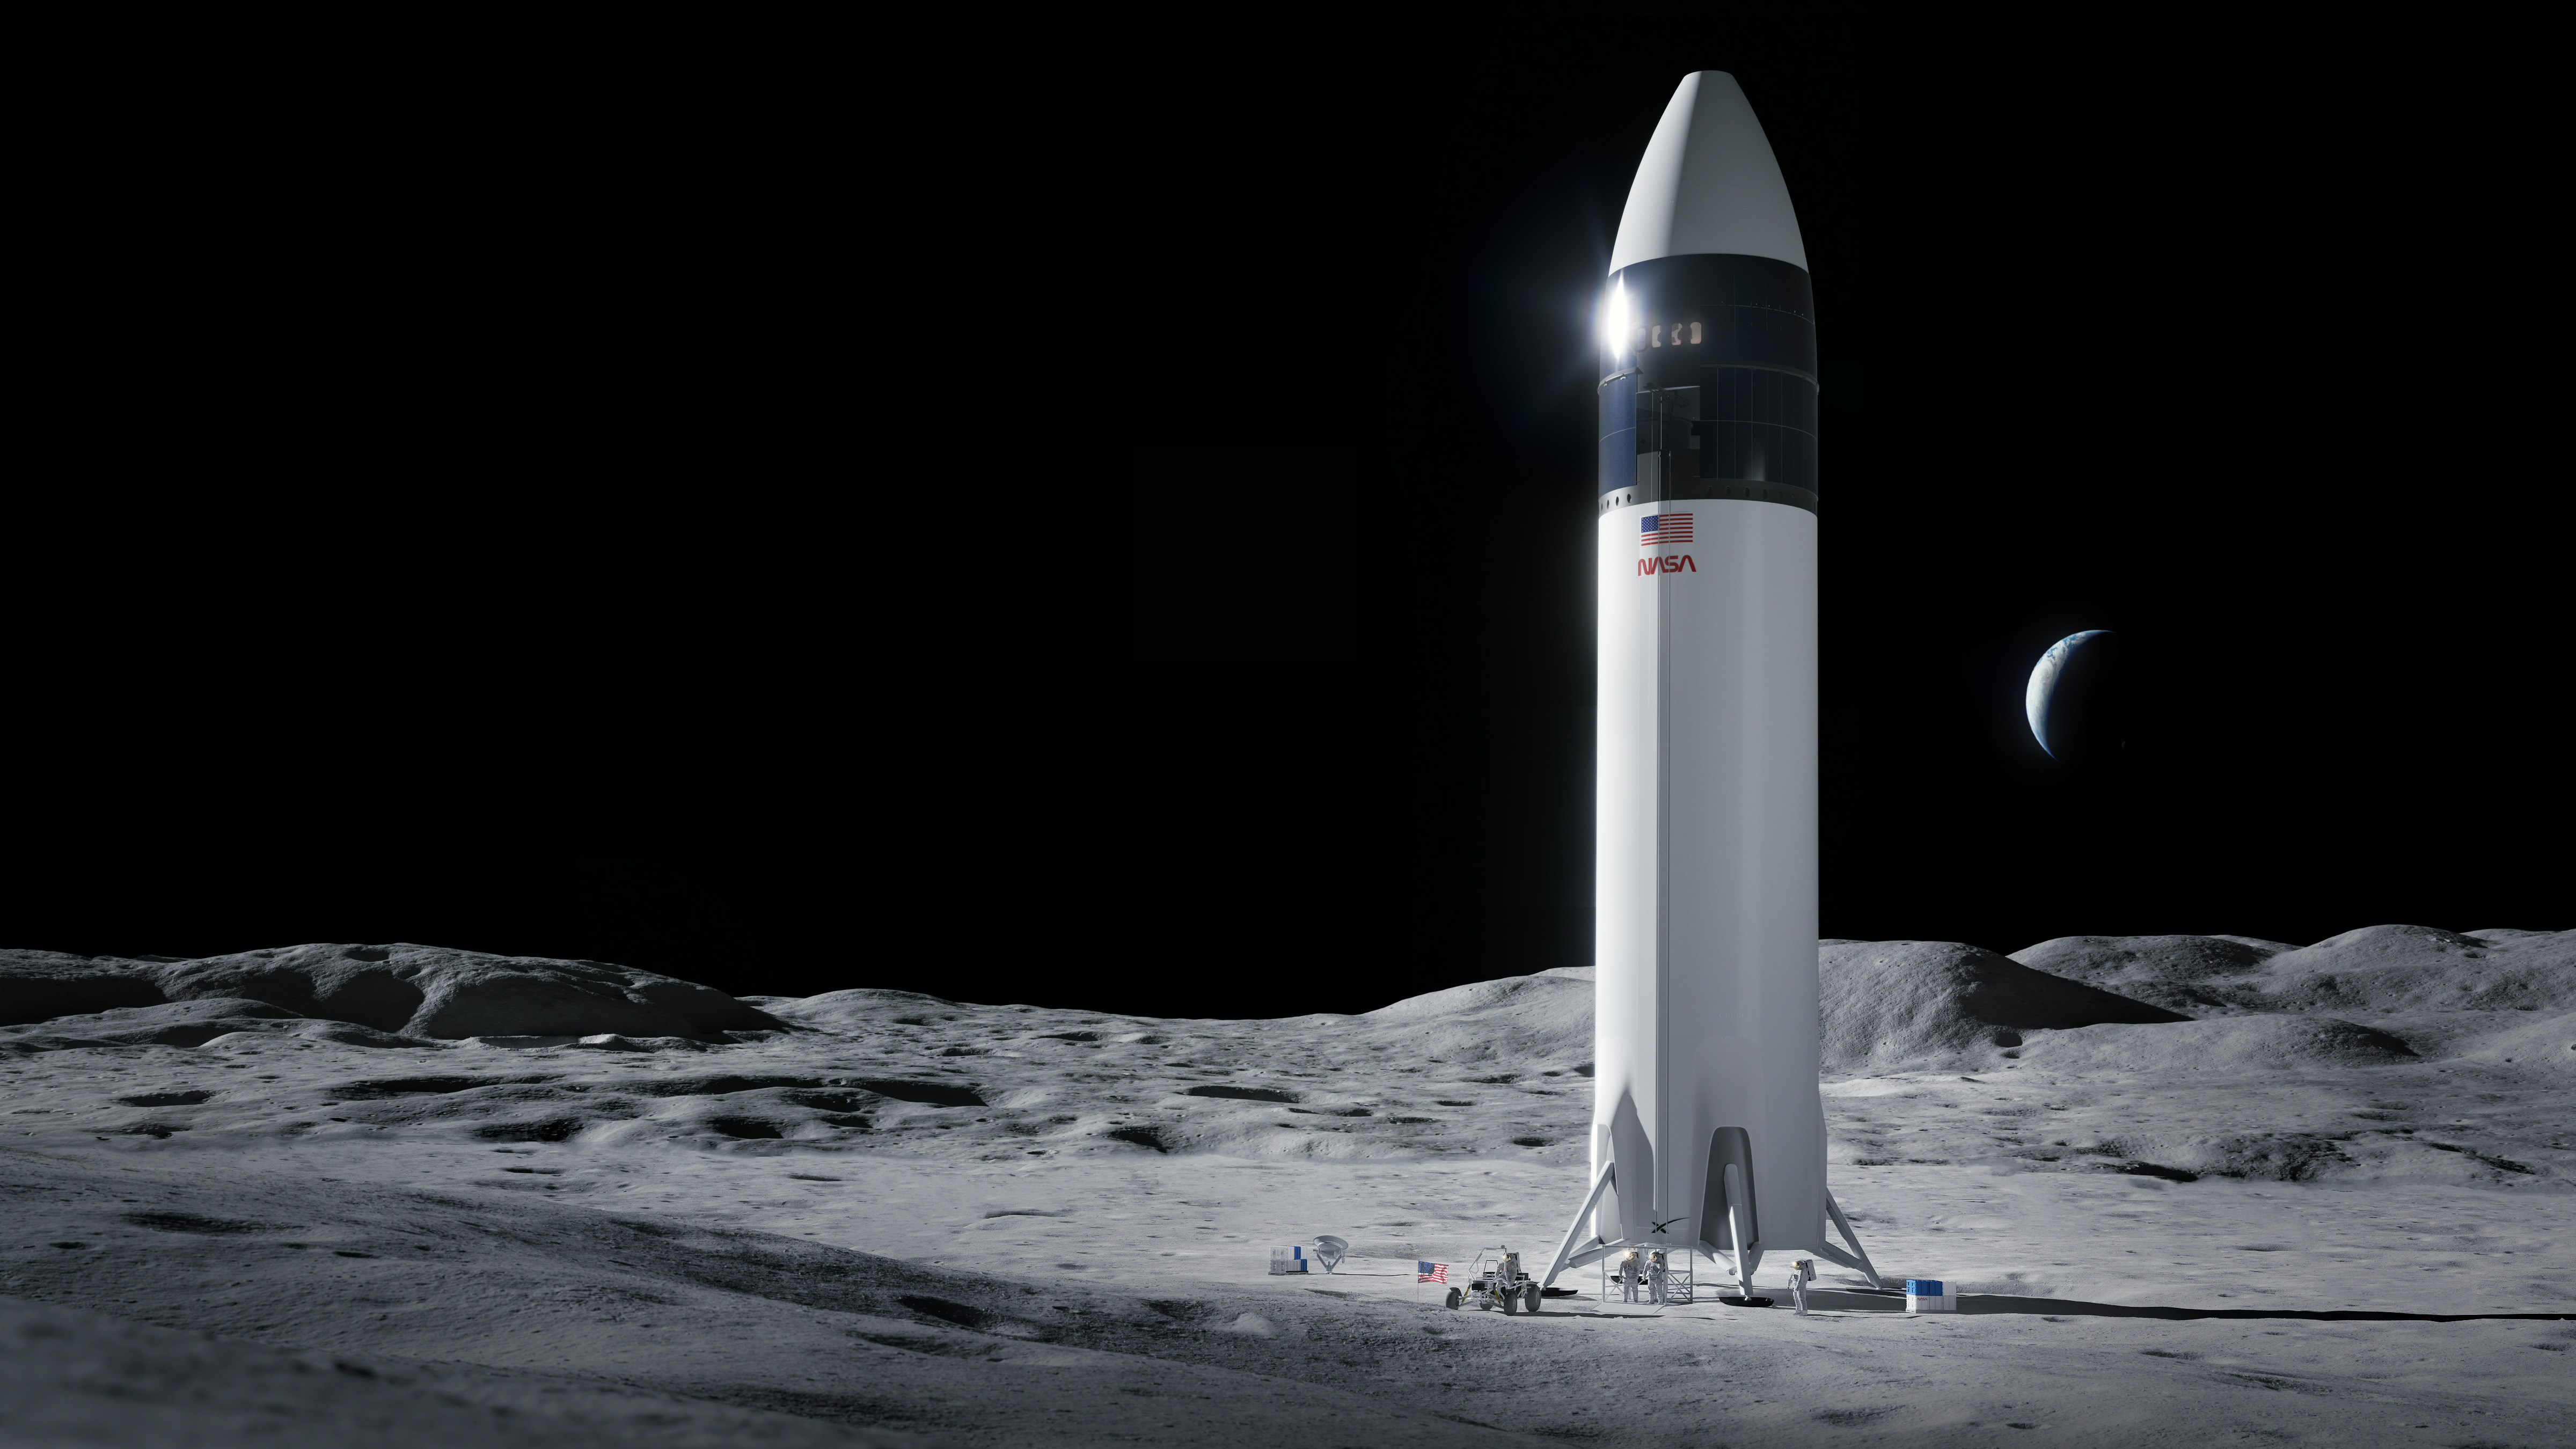 SpaceX's Starship vehicle sits on the Moon as NASA astronauts explore the surface.Image: SpaceX